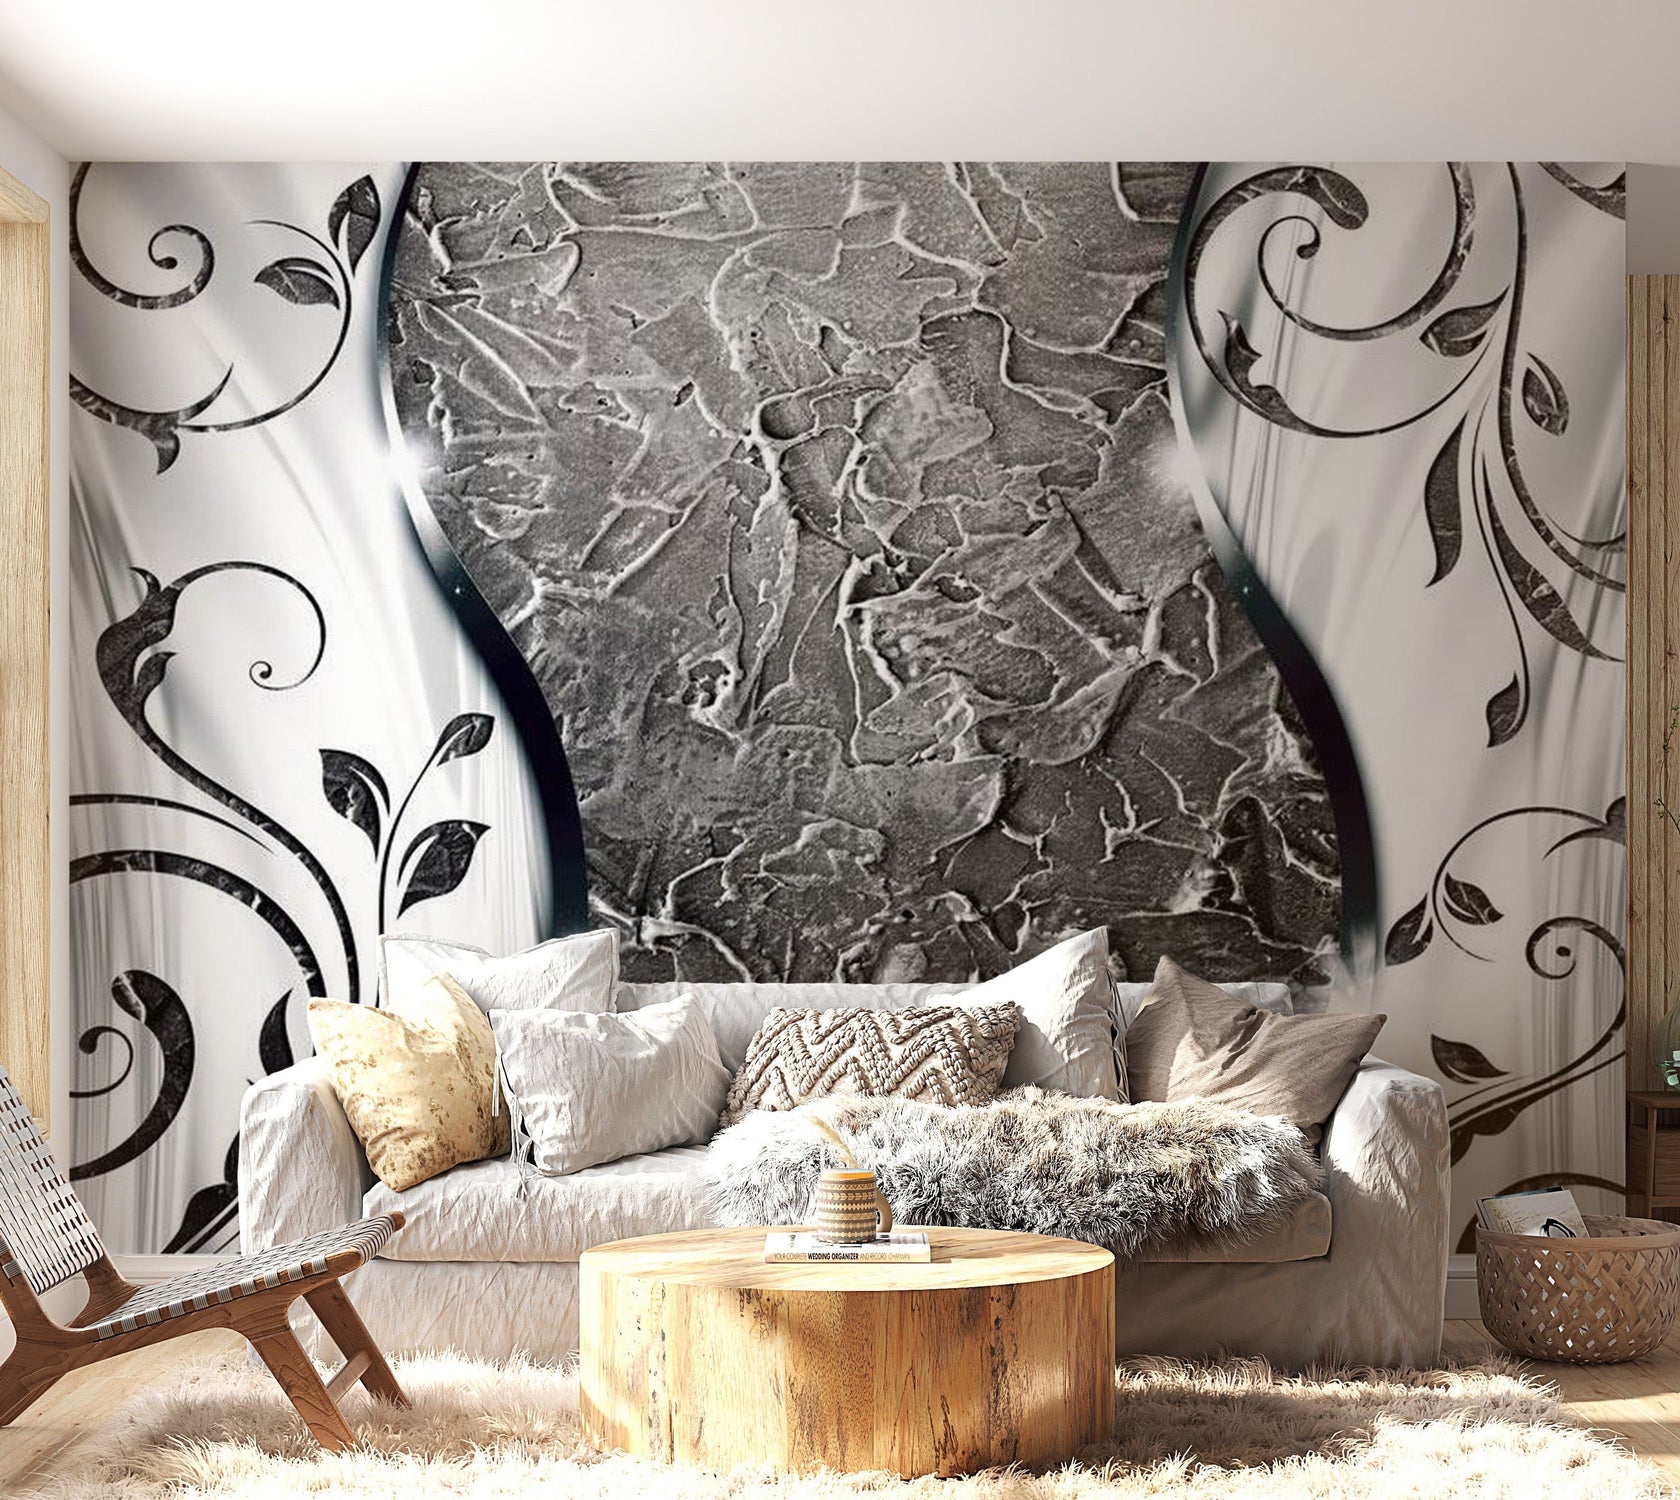 Peel & Stick Glam Wall Mural - Silver Twigs - Removable Wall Decals